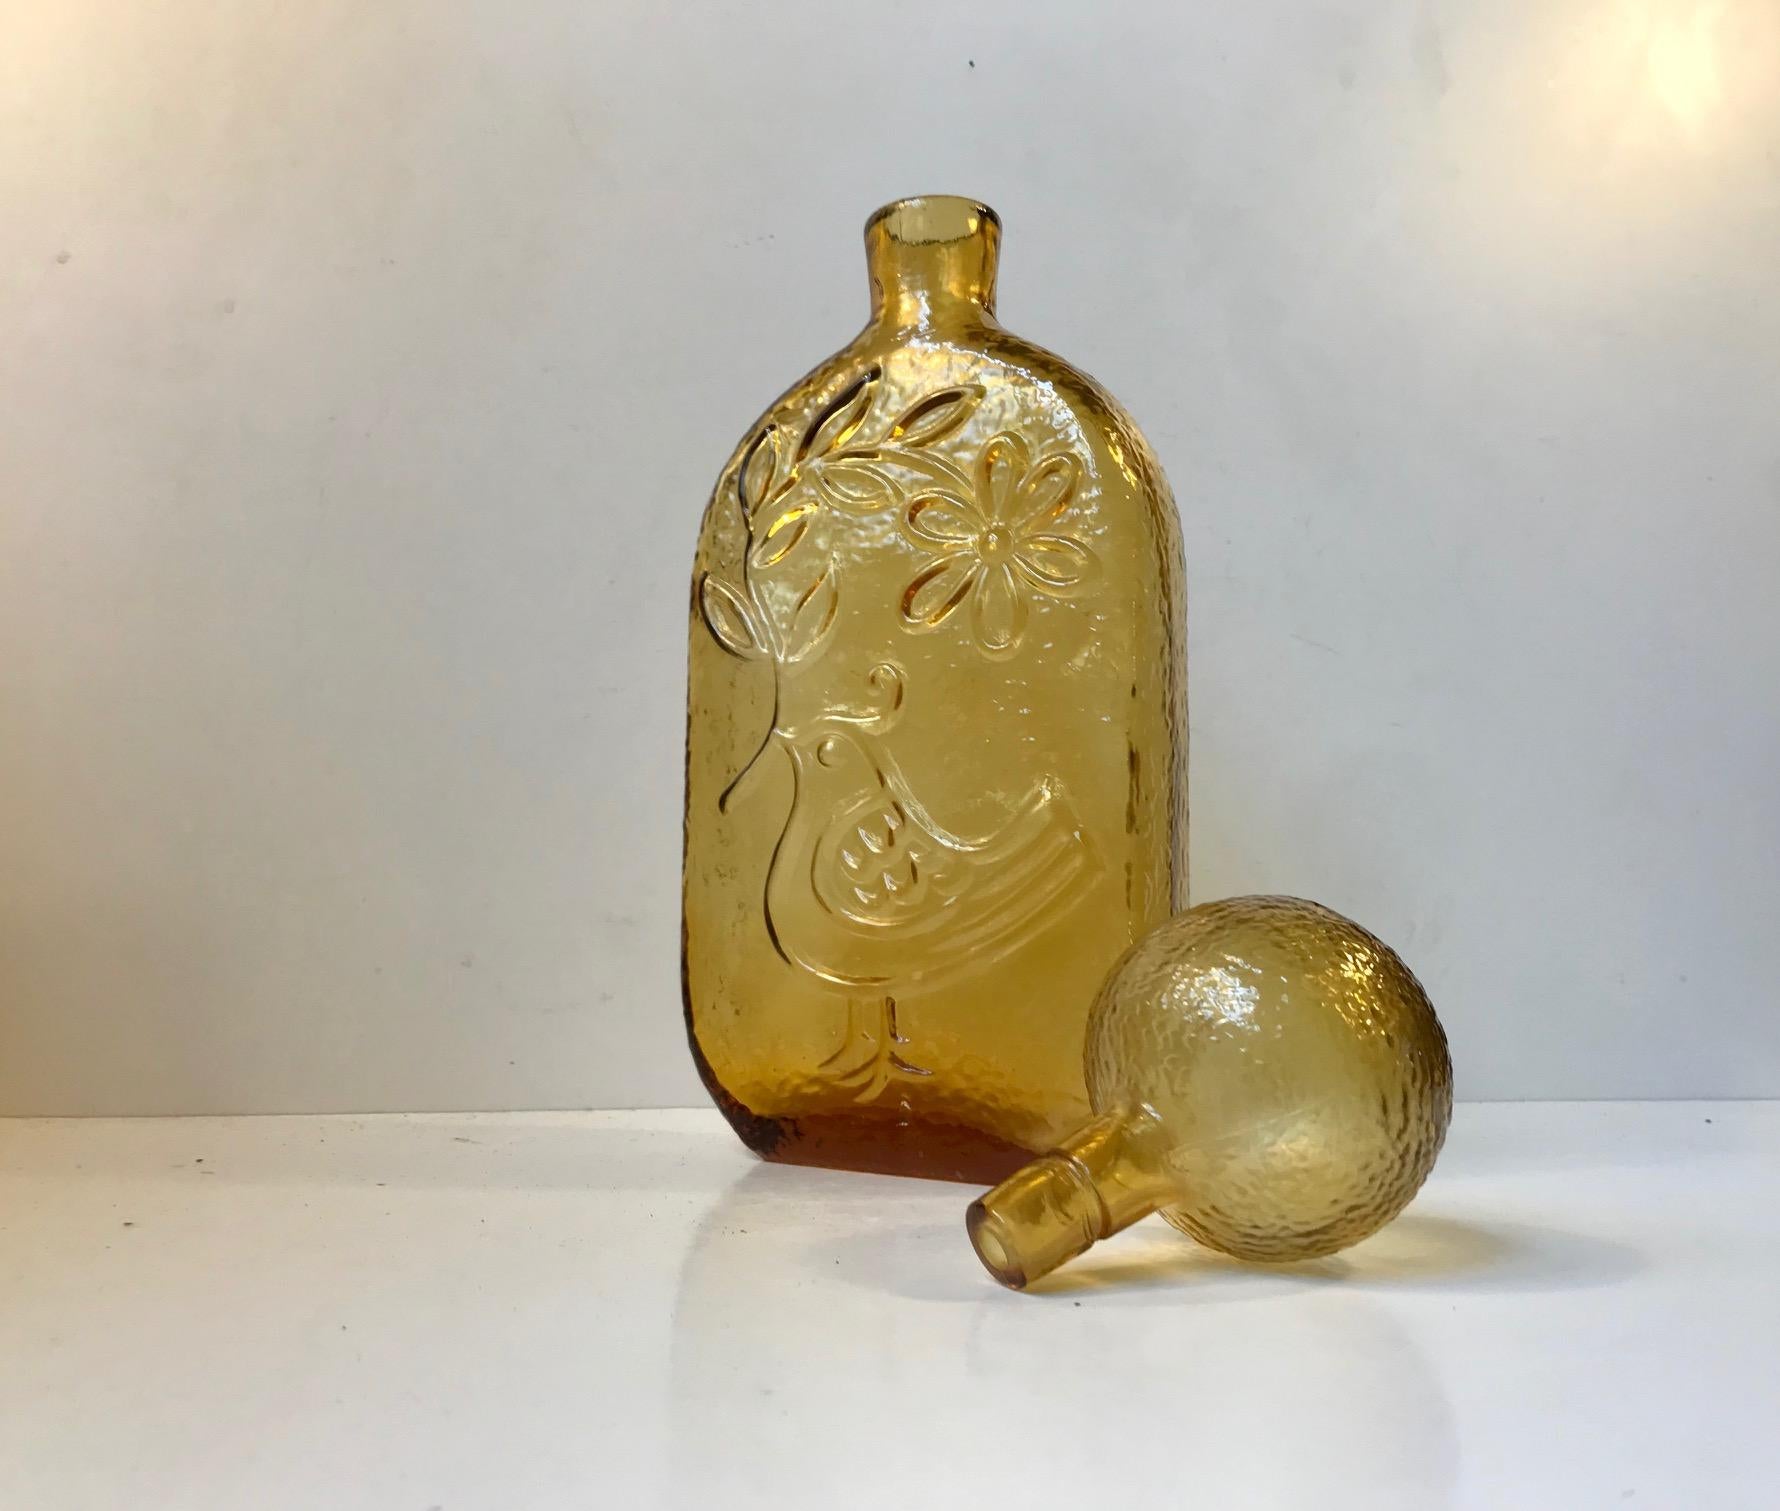 Yellow glass decanter with impressed dove and flowers in relief. Designed and manufactured by Empoli in Italy during the early 1970s. This decorative decanter can contain between 0.7-1 liter spirits or water.
 